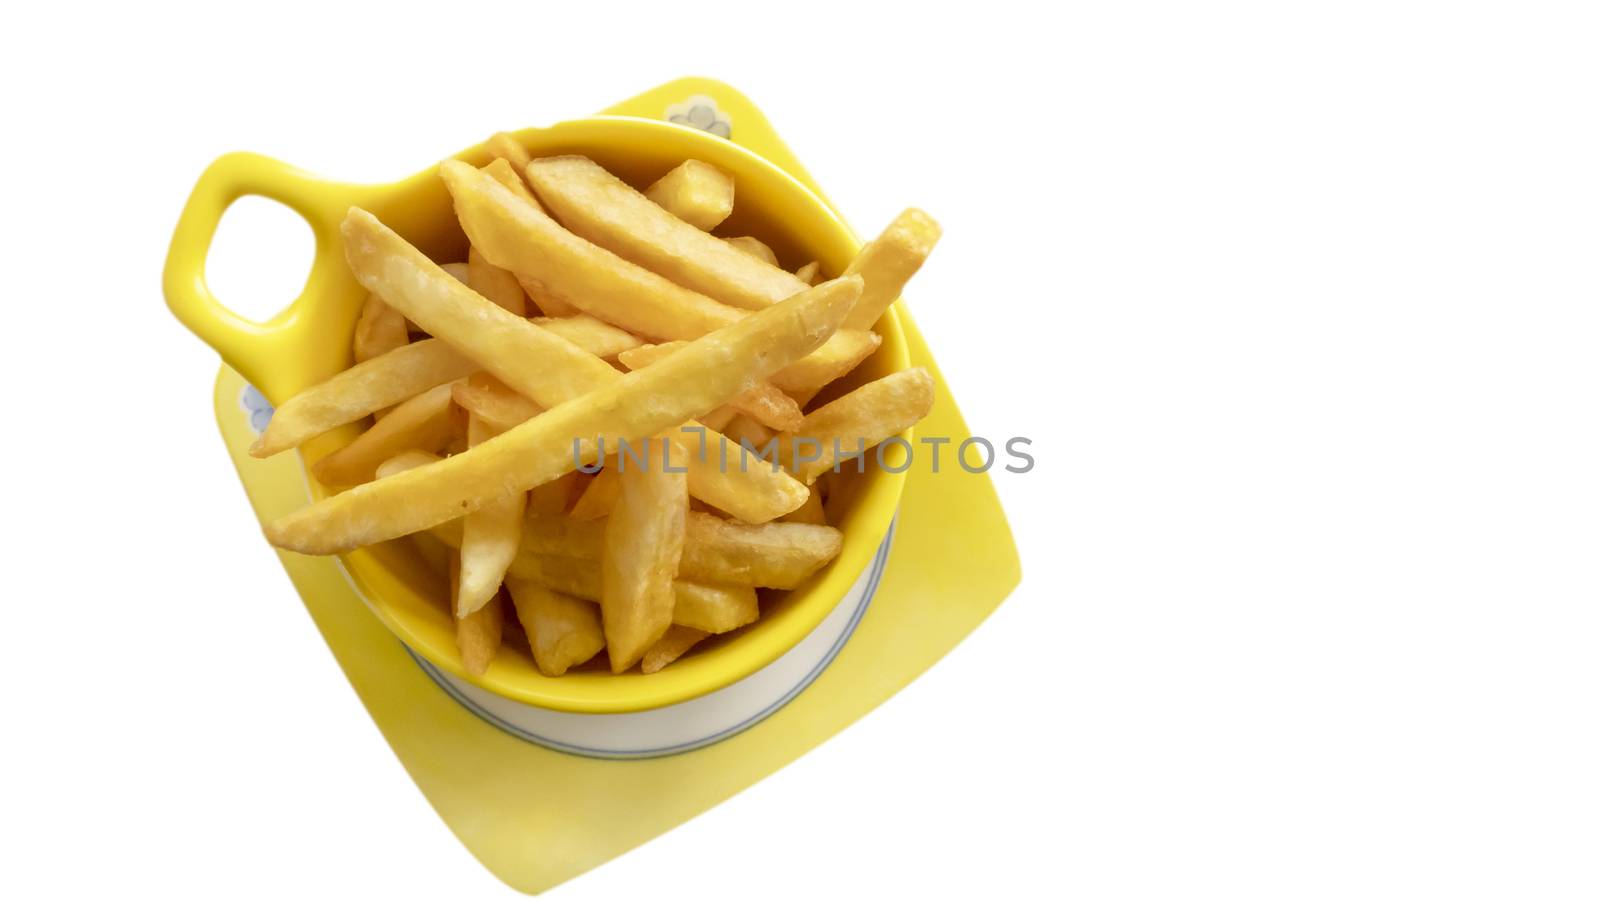 Cups of French fries over white background